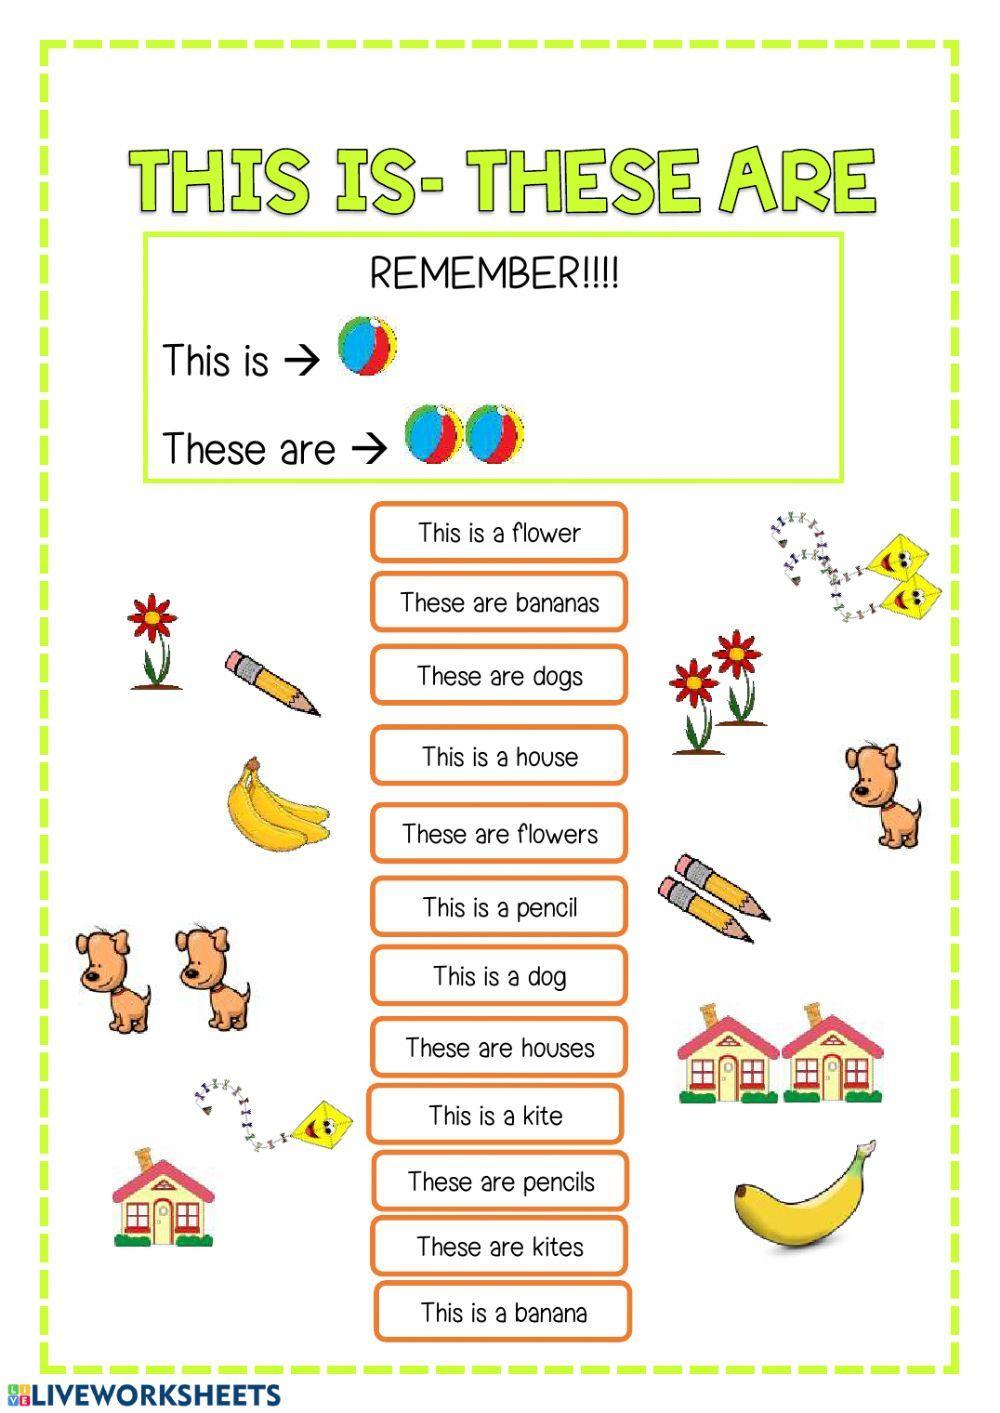 This is-these are interactive worksheet | Live Worksheets